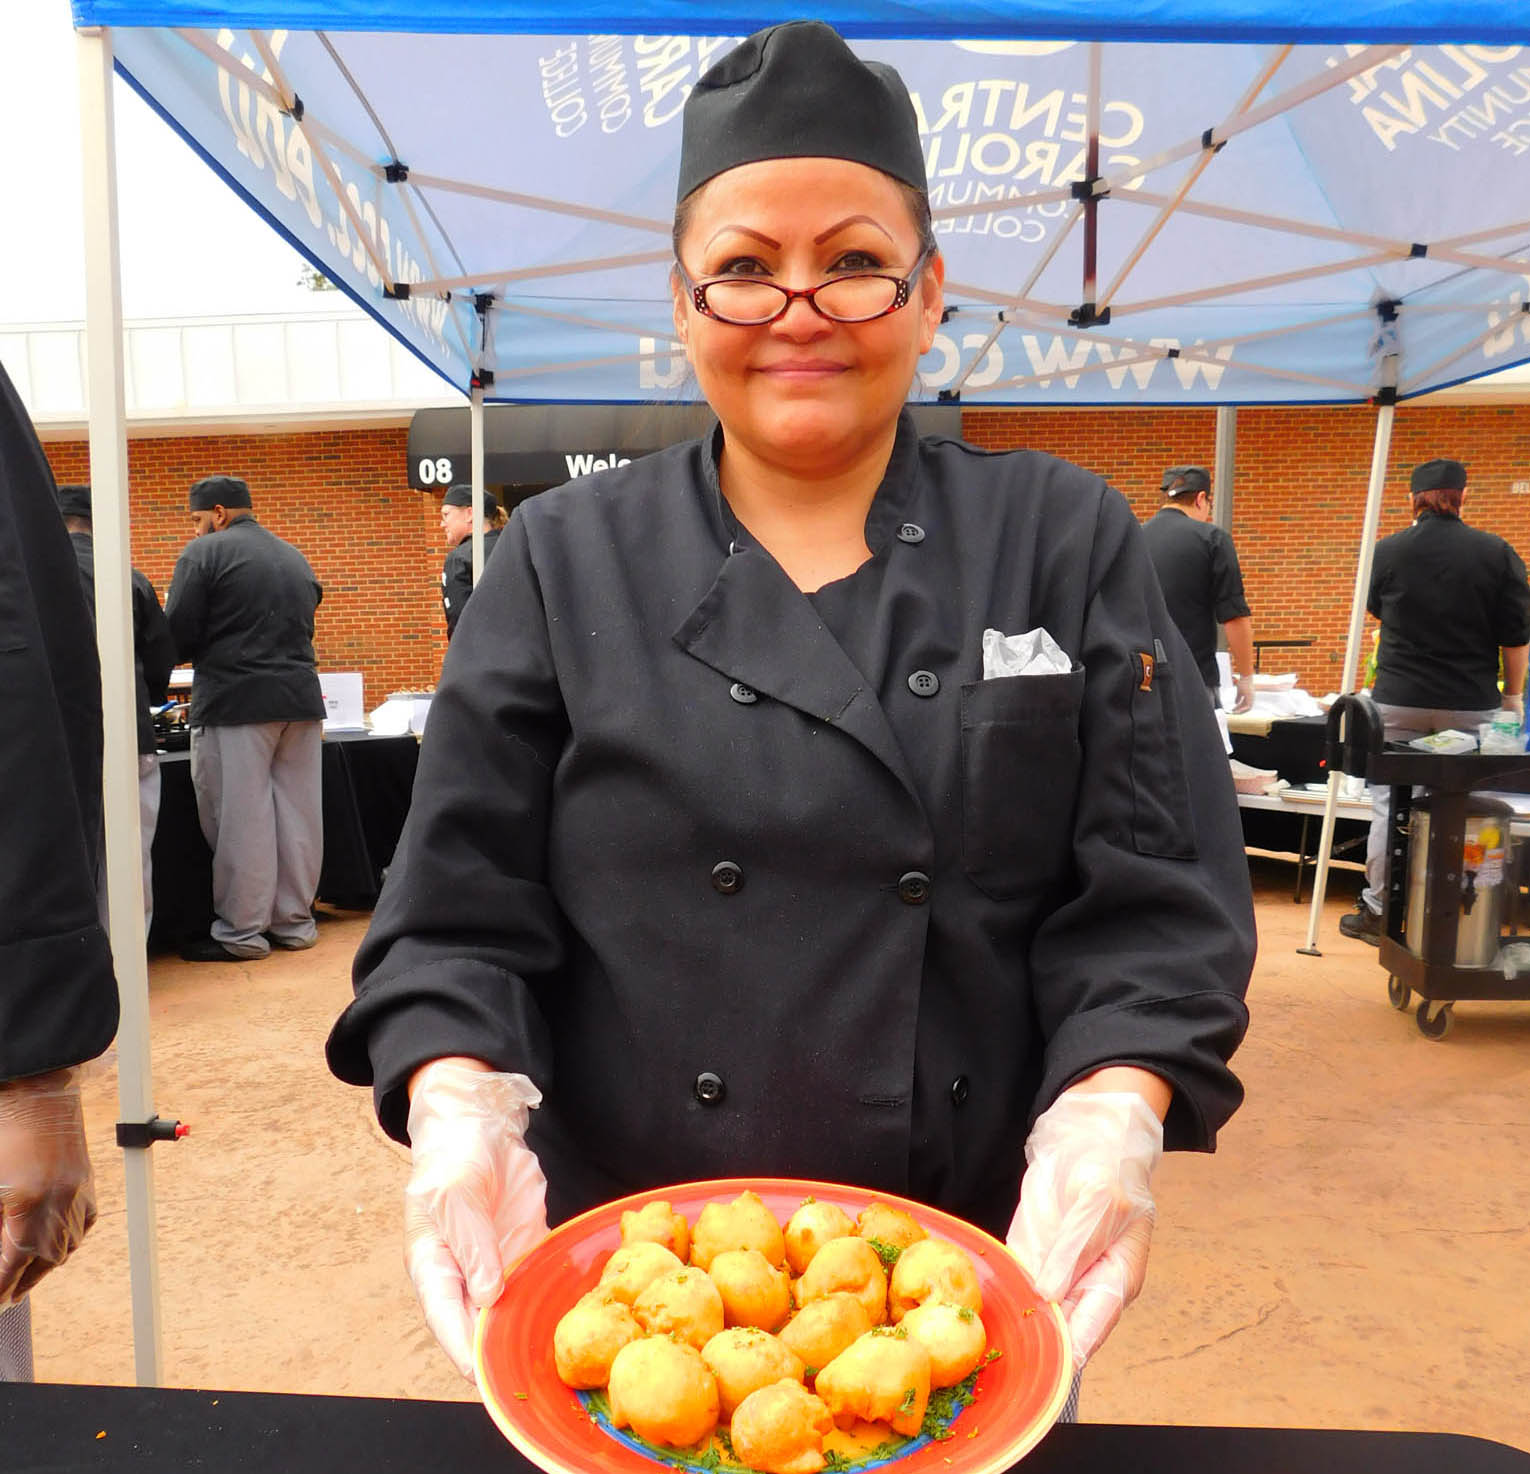 Click to enlarge,  Doni Shepard Steele, of Siler City, with her Bacon Pimento Cheese Bombs, won the People's Choice Award at the Central Carolina Community College 3rd Annual Culinary Showcase. The event, featuring dishes by Culinary &amp; Hospitality Arts students represented from Chatham, Harnett, and Lee counties, was held April 11th on the Central Carolina Community College Lee Main Campus in Sanford. For more information on the CCCC Culinary &amp; Hospitality Arts program, visit www.cccc.edu/culinaryarts/. 